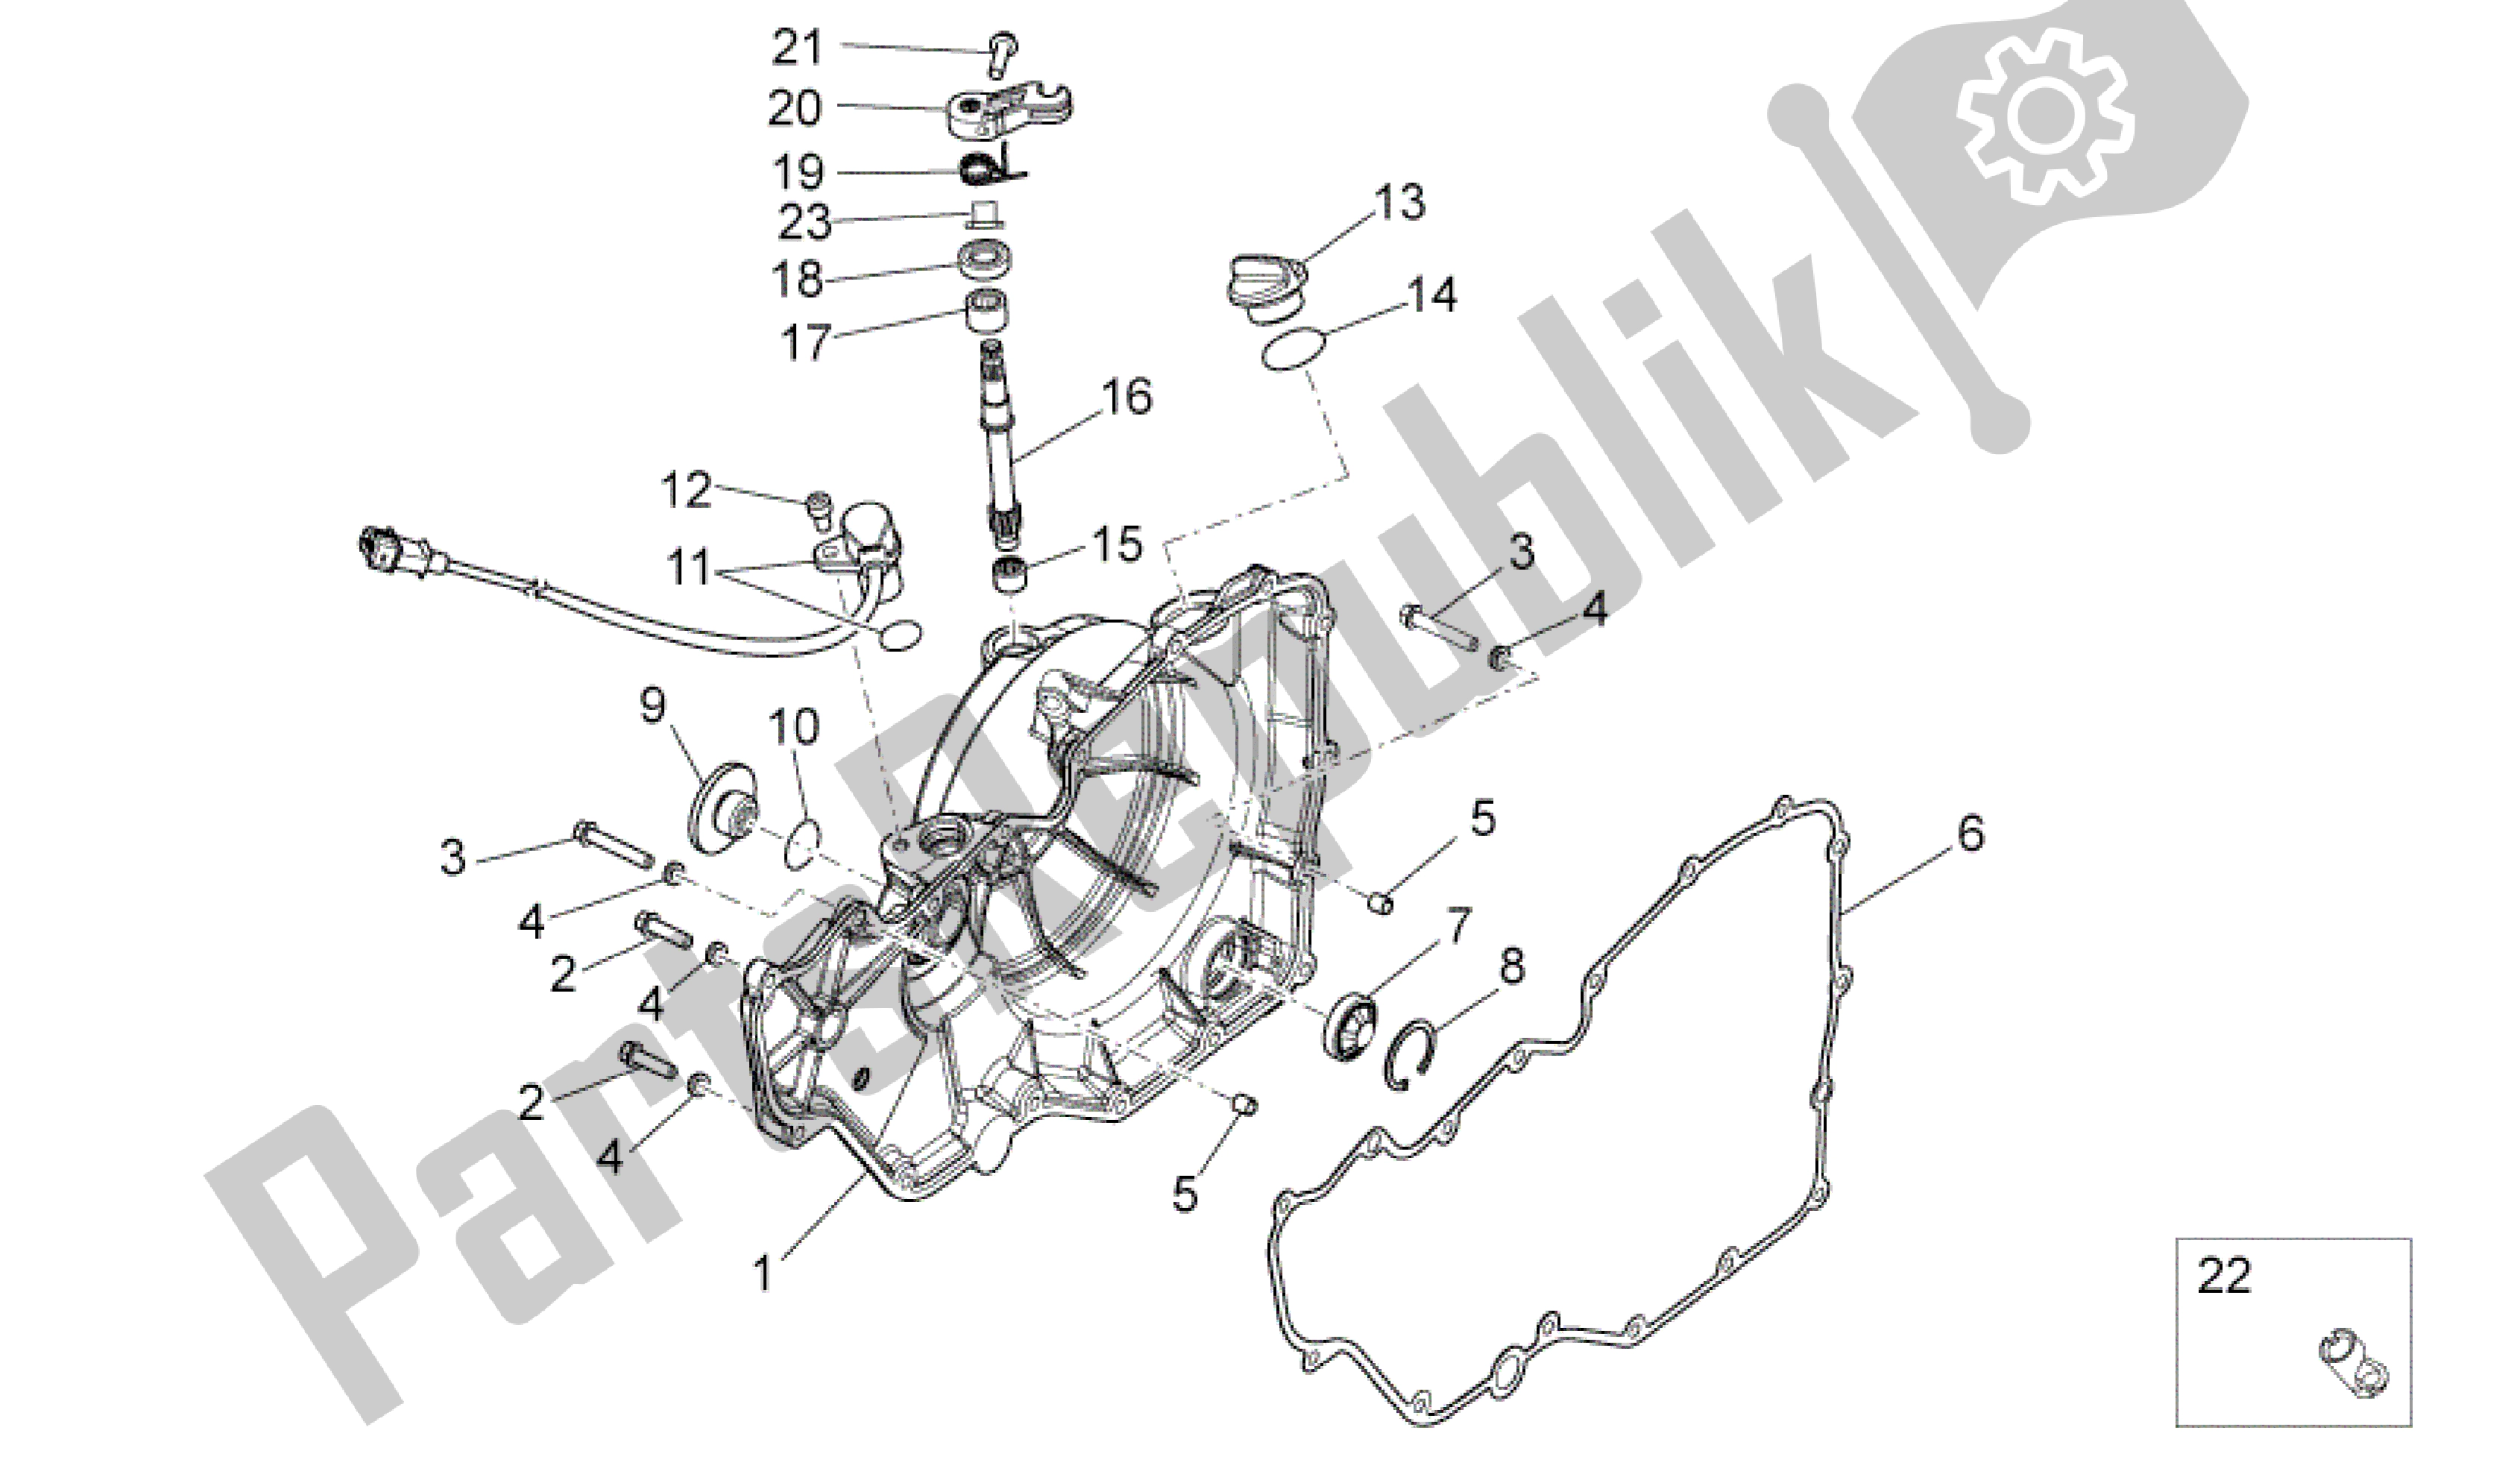 All parts for the Clutch Cover of the Aprilia RSV4 Aprc Factory ABS 3986 1000 2013